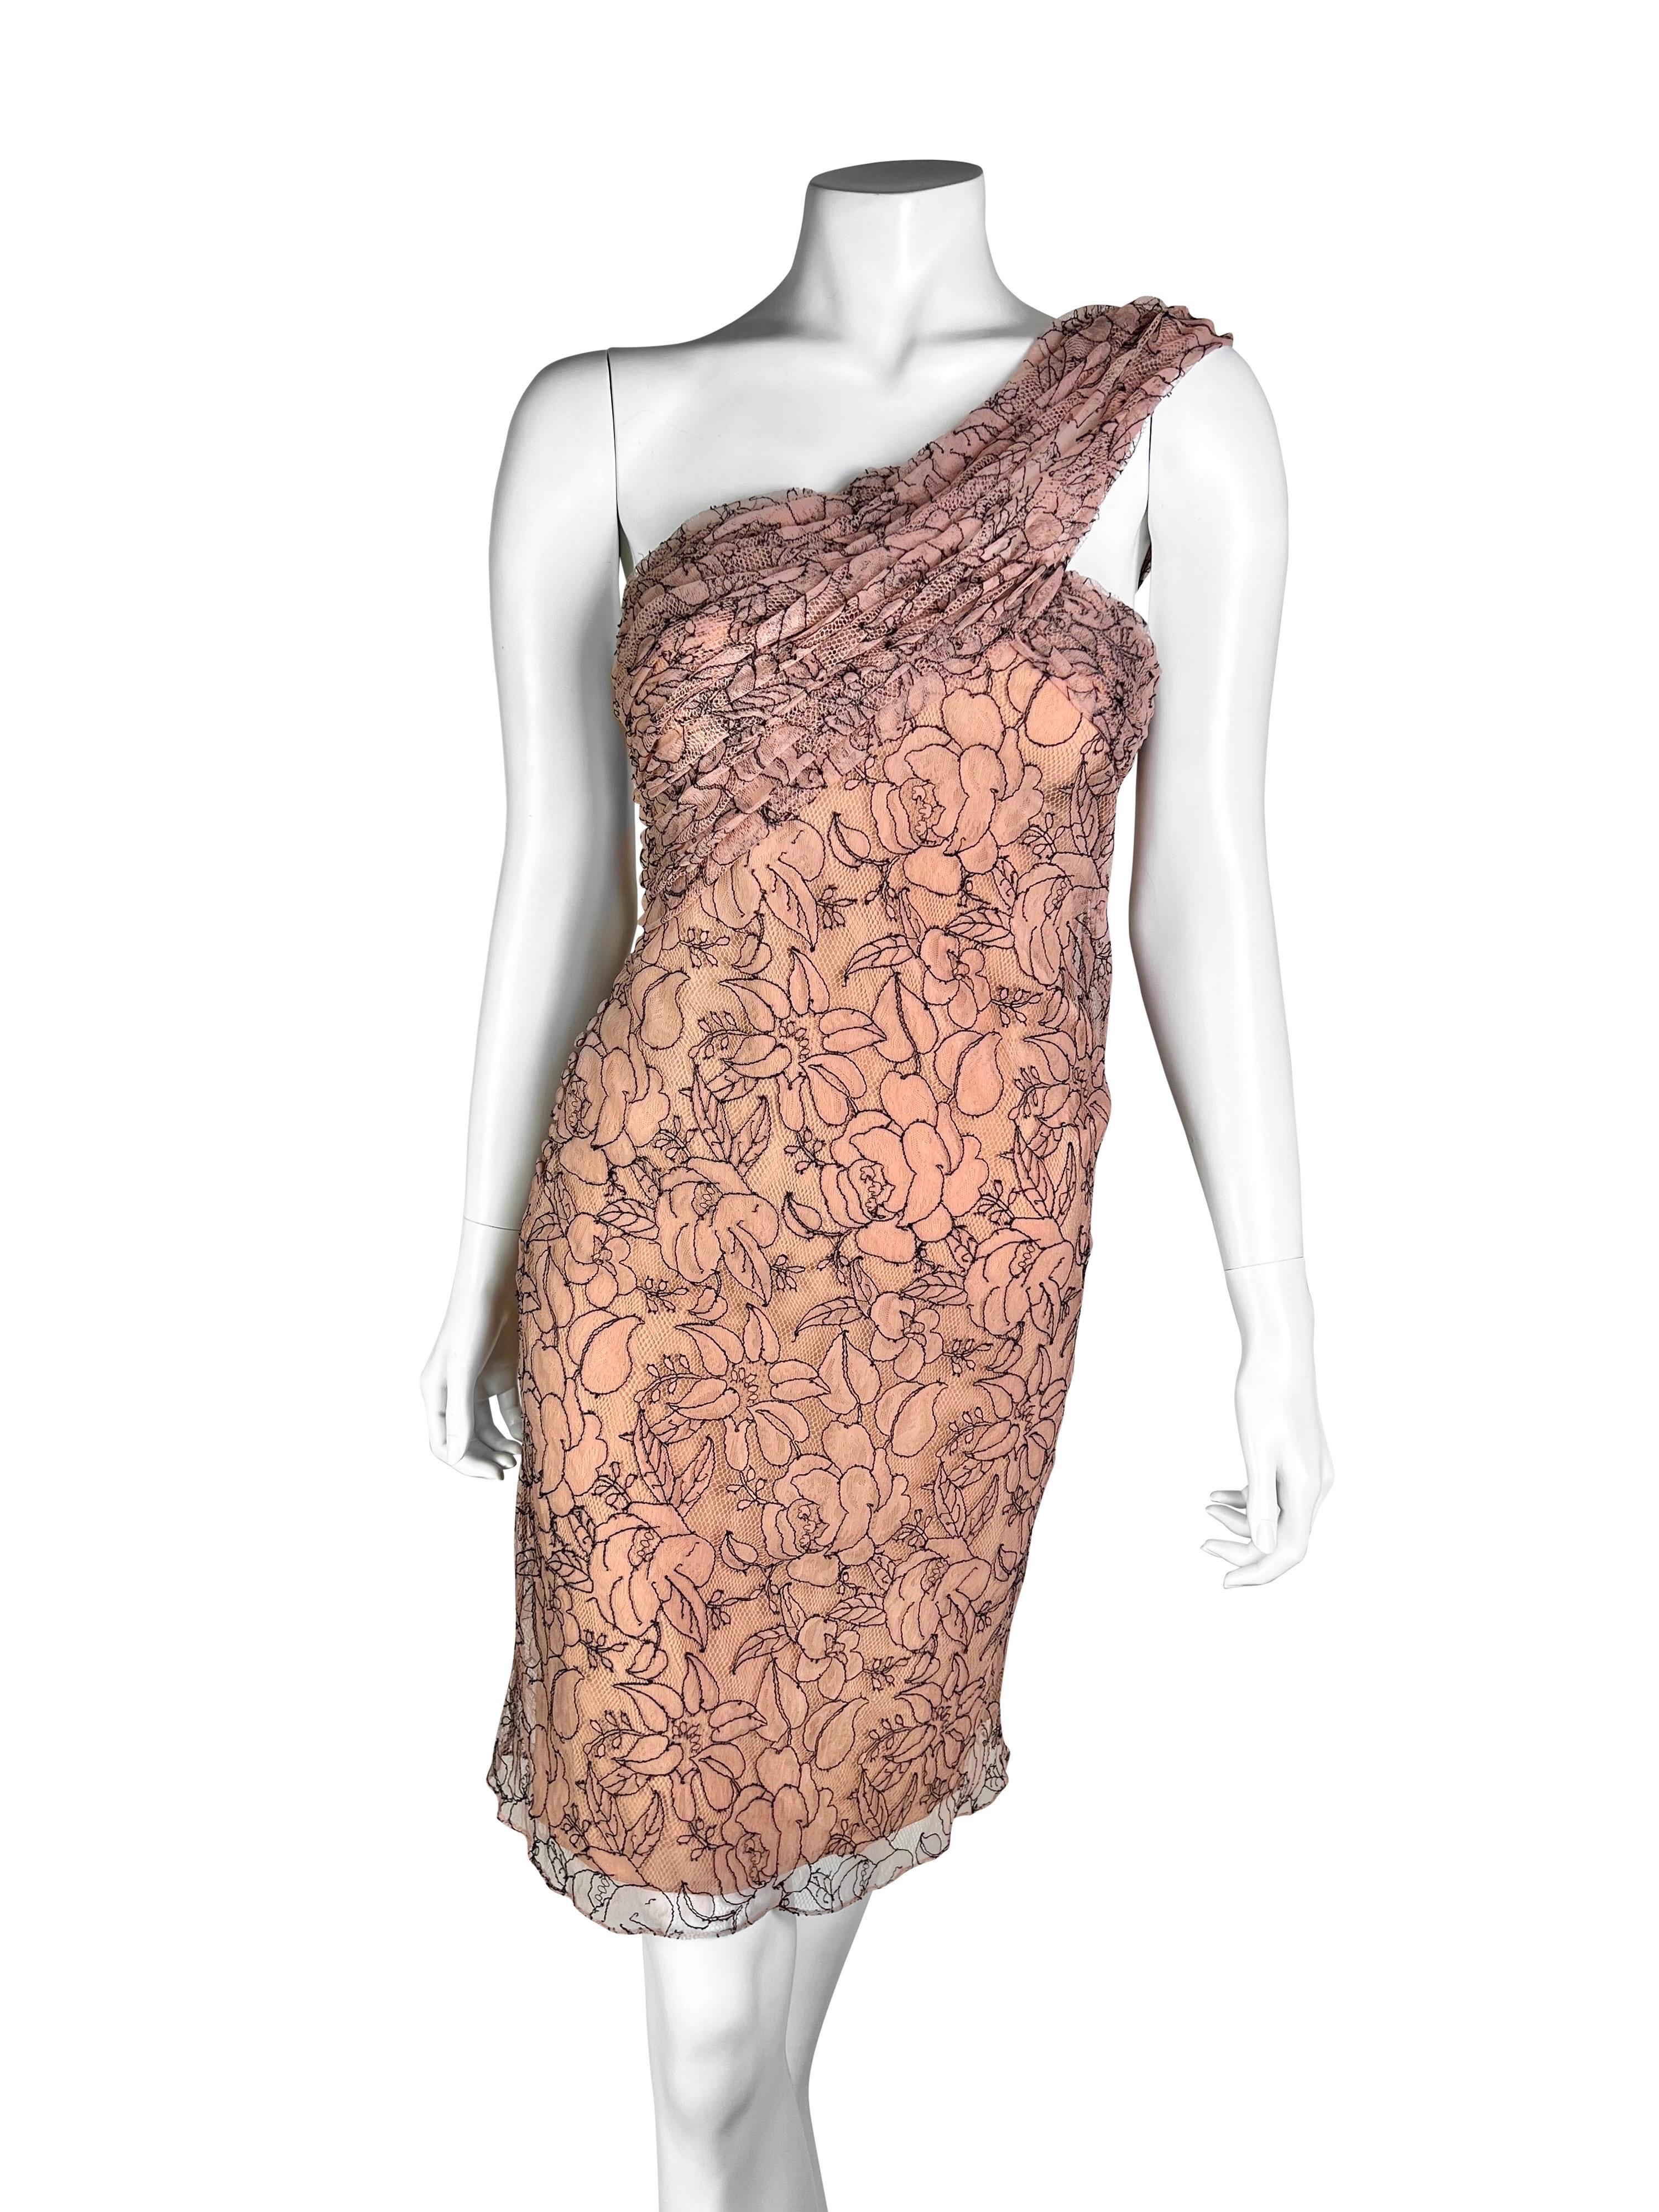  Spring 2006 Dior by John Galliano Lace Dress For Sale 3